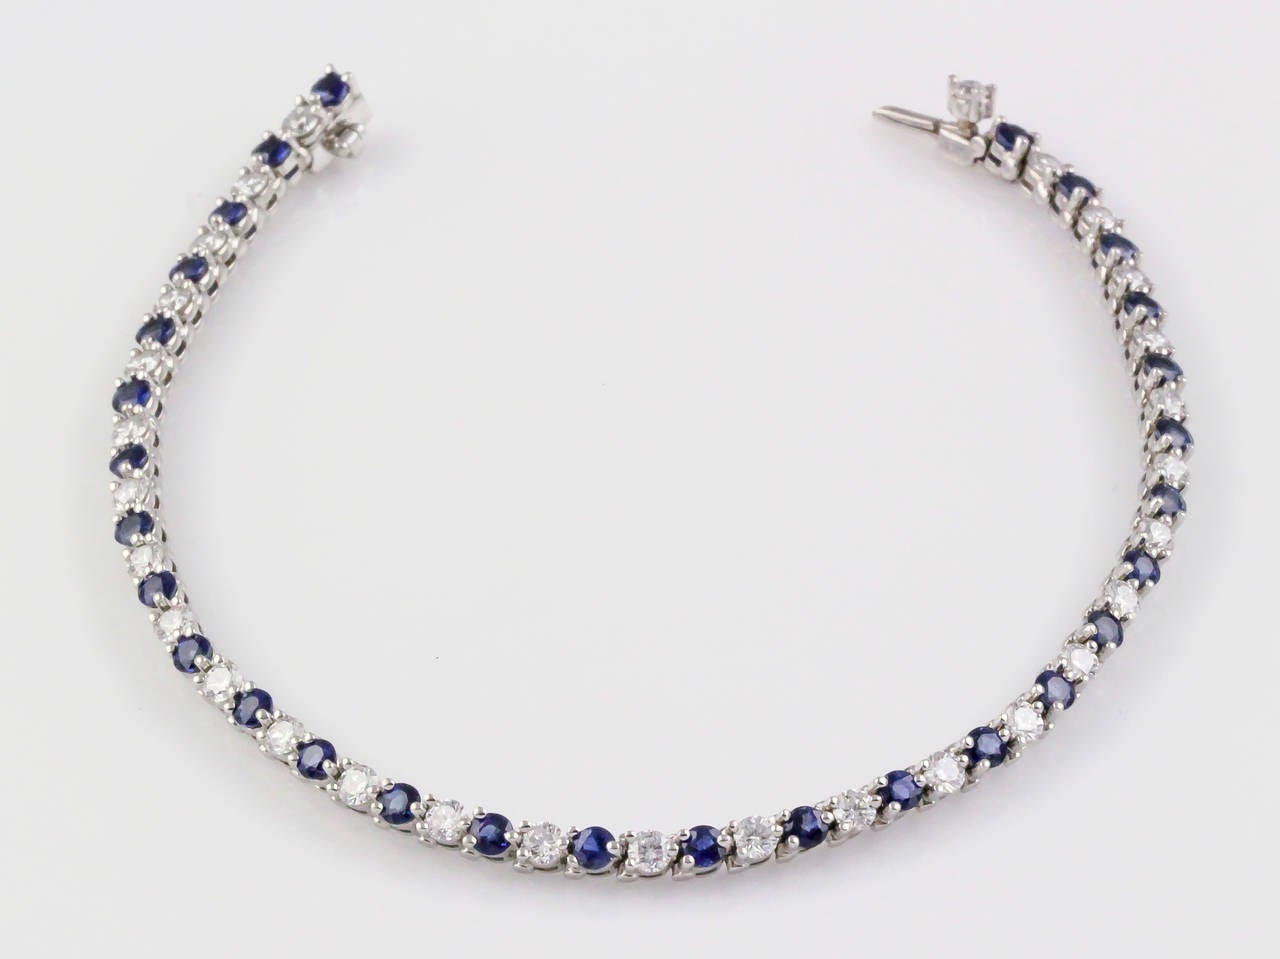 Elegant blue sapphire, diamond and platinum line bracelet by Tiffany & Co. This exquisite piece features very high grade round brilliant cut diamonds of approx 2.0 carats, as well as rich blue sapphires of approx 2 carats as well. Excellent